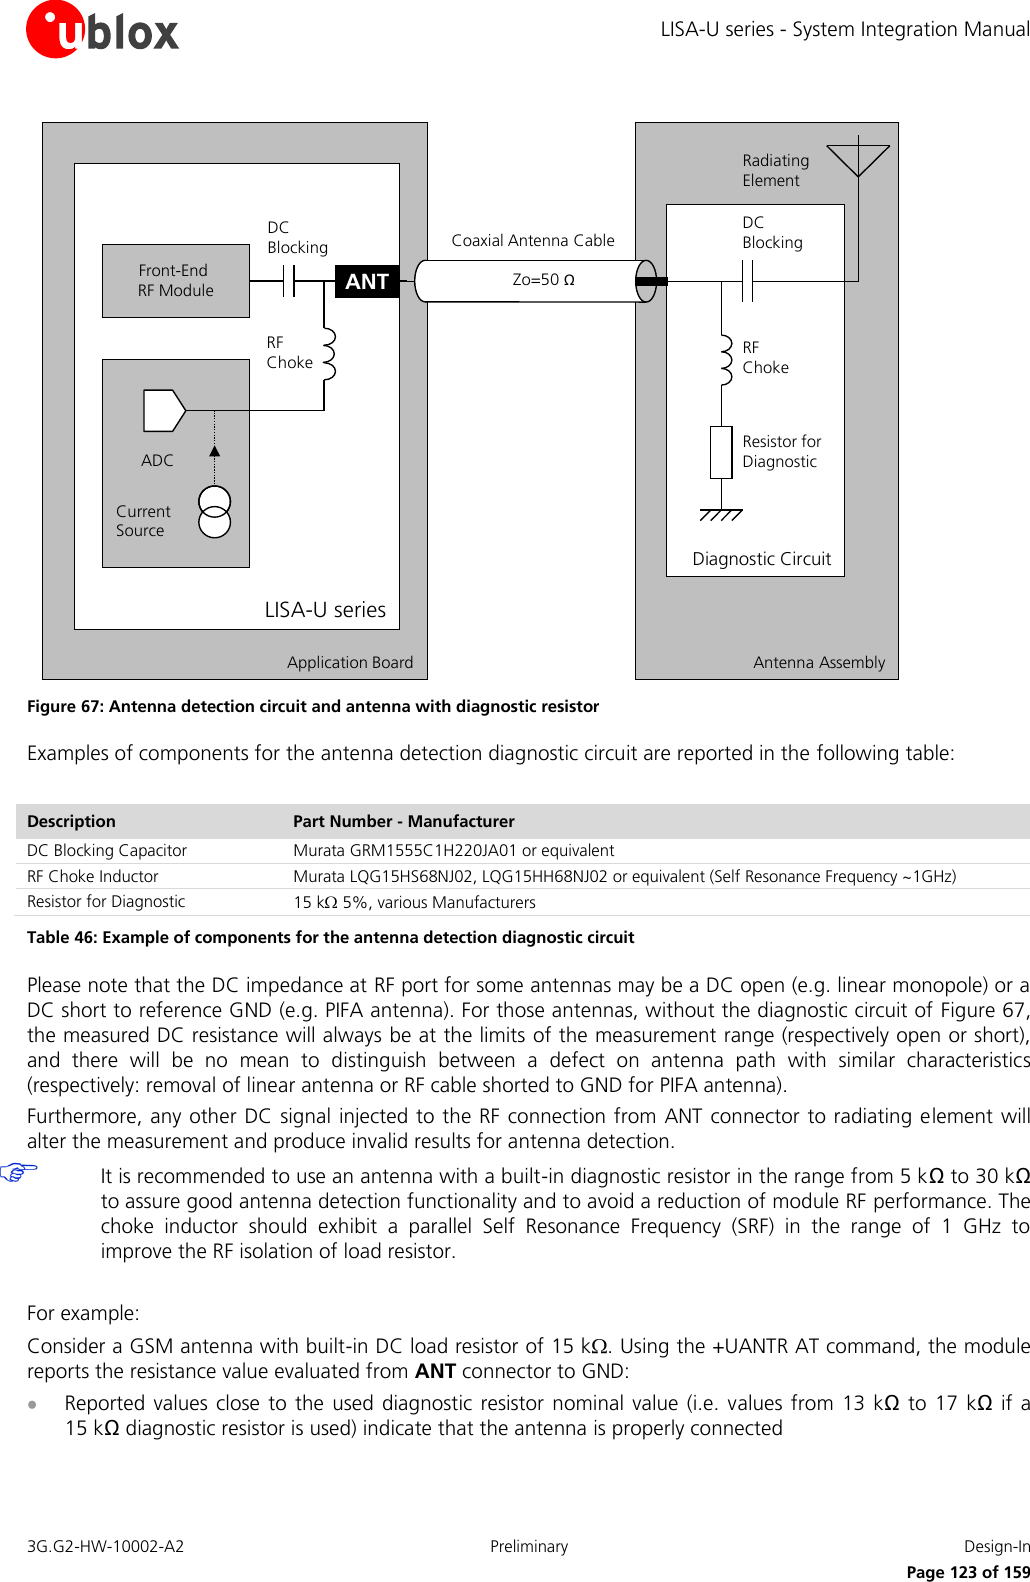 LISA-U series - System Integration Manual 3G.G2-HW-10002-A2  Preliminary  Design-In      Page 123 of 159 Application Board Antenna AssemblyDiagnostic CircuitLISA-U seriesADCCurrent SourceRF ChokeDC BlockingFront-End RF ModuleRF ChokeDC BlockingRadiating ElementZo=50 ΩResistor for DiagnosticCoaxial Antenna CableANT Figure 67: Antenna detection circuit and antenna with diagnostic resistor Examples of components for the antenna detection diagnostic circuit are reported in the following table:  Description Part Number - Manufacturer DC Blocking Capacitor  Murata GRM1555C1H220JA01 or equivalent RF Choke Inductor Murata LQG15HS68NJ02, LQG15HH68NJ02 or equivalent (Self Resonance Frequency ~1GHz) Resistor for Diagnostic  15 k  5%, various Manufacturers Table 46: Example of components for the antenna detection diagnostic circuit Please note that the DC impedance at RF port for some antennas may be a DC open (e.g. linear monopole) or a DC short to reference GND (e.g. PIFA antenna). For those antennas, without the diagnostic circuit of Figure 67, the measured DC resistance will always be at the limits of the measurement range (respectively open or short), and  there  will  be  no  mean  to  distinguish  between  a  defect  on  antenna  path  with  similar  characteristics (respectively: removal of linear antenna or RF cable shorted to GND for PIFA antenna). Furthermore, any other DC signal injected to the RF connection from ANT connector to radiating element will alter the measurement and produce invalid results for antenna detection.  It is recommended to use an antenna with a built-in diagnostic resistor in the range from 5 kΩ to 30 kΩ to assure good antenna detection functionality and to avoid a reduction of module RF performance. The choke  inductor  should  exhibit  a  parallel  Self  Resonance  Frequency  (SRF)  in  the  range  of  1  GHz  to improve the RF isolation of load resistor.  For example: Consider a GSM antenna with built-in DC load resistor of 15 k . Using the +UANTR AT command, the module reports the resistance value evaluated from ANT connector to GND:  Reported  values close  to the  used diagnostic  resistor  nominal  value (i.e.  values from  13 kΩ to  17 kΩ  if a 15 kΩ diagnostic resistor is used) indicate that the antenna is properly connected 